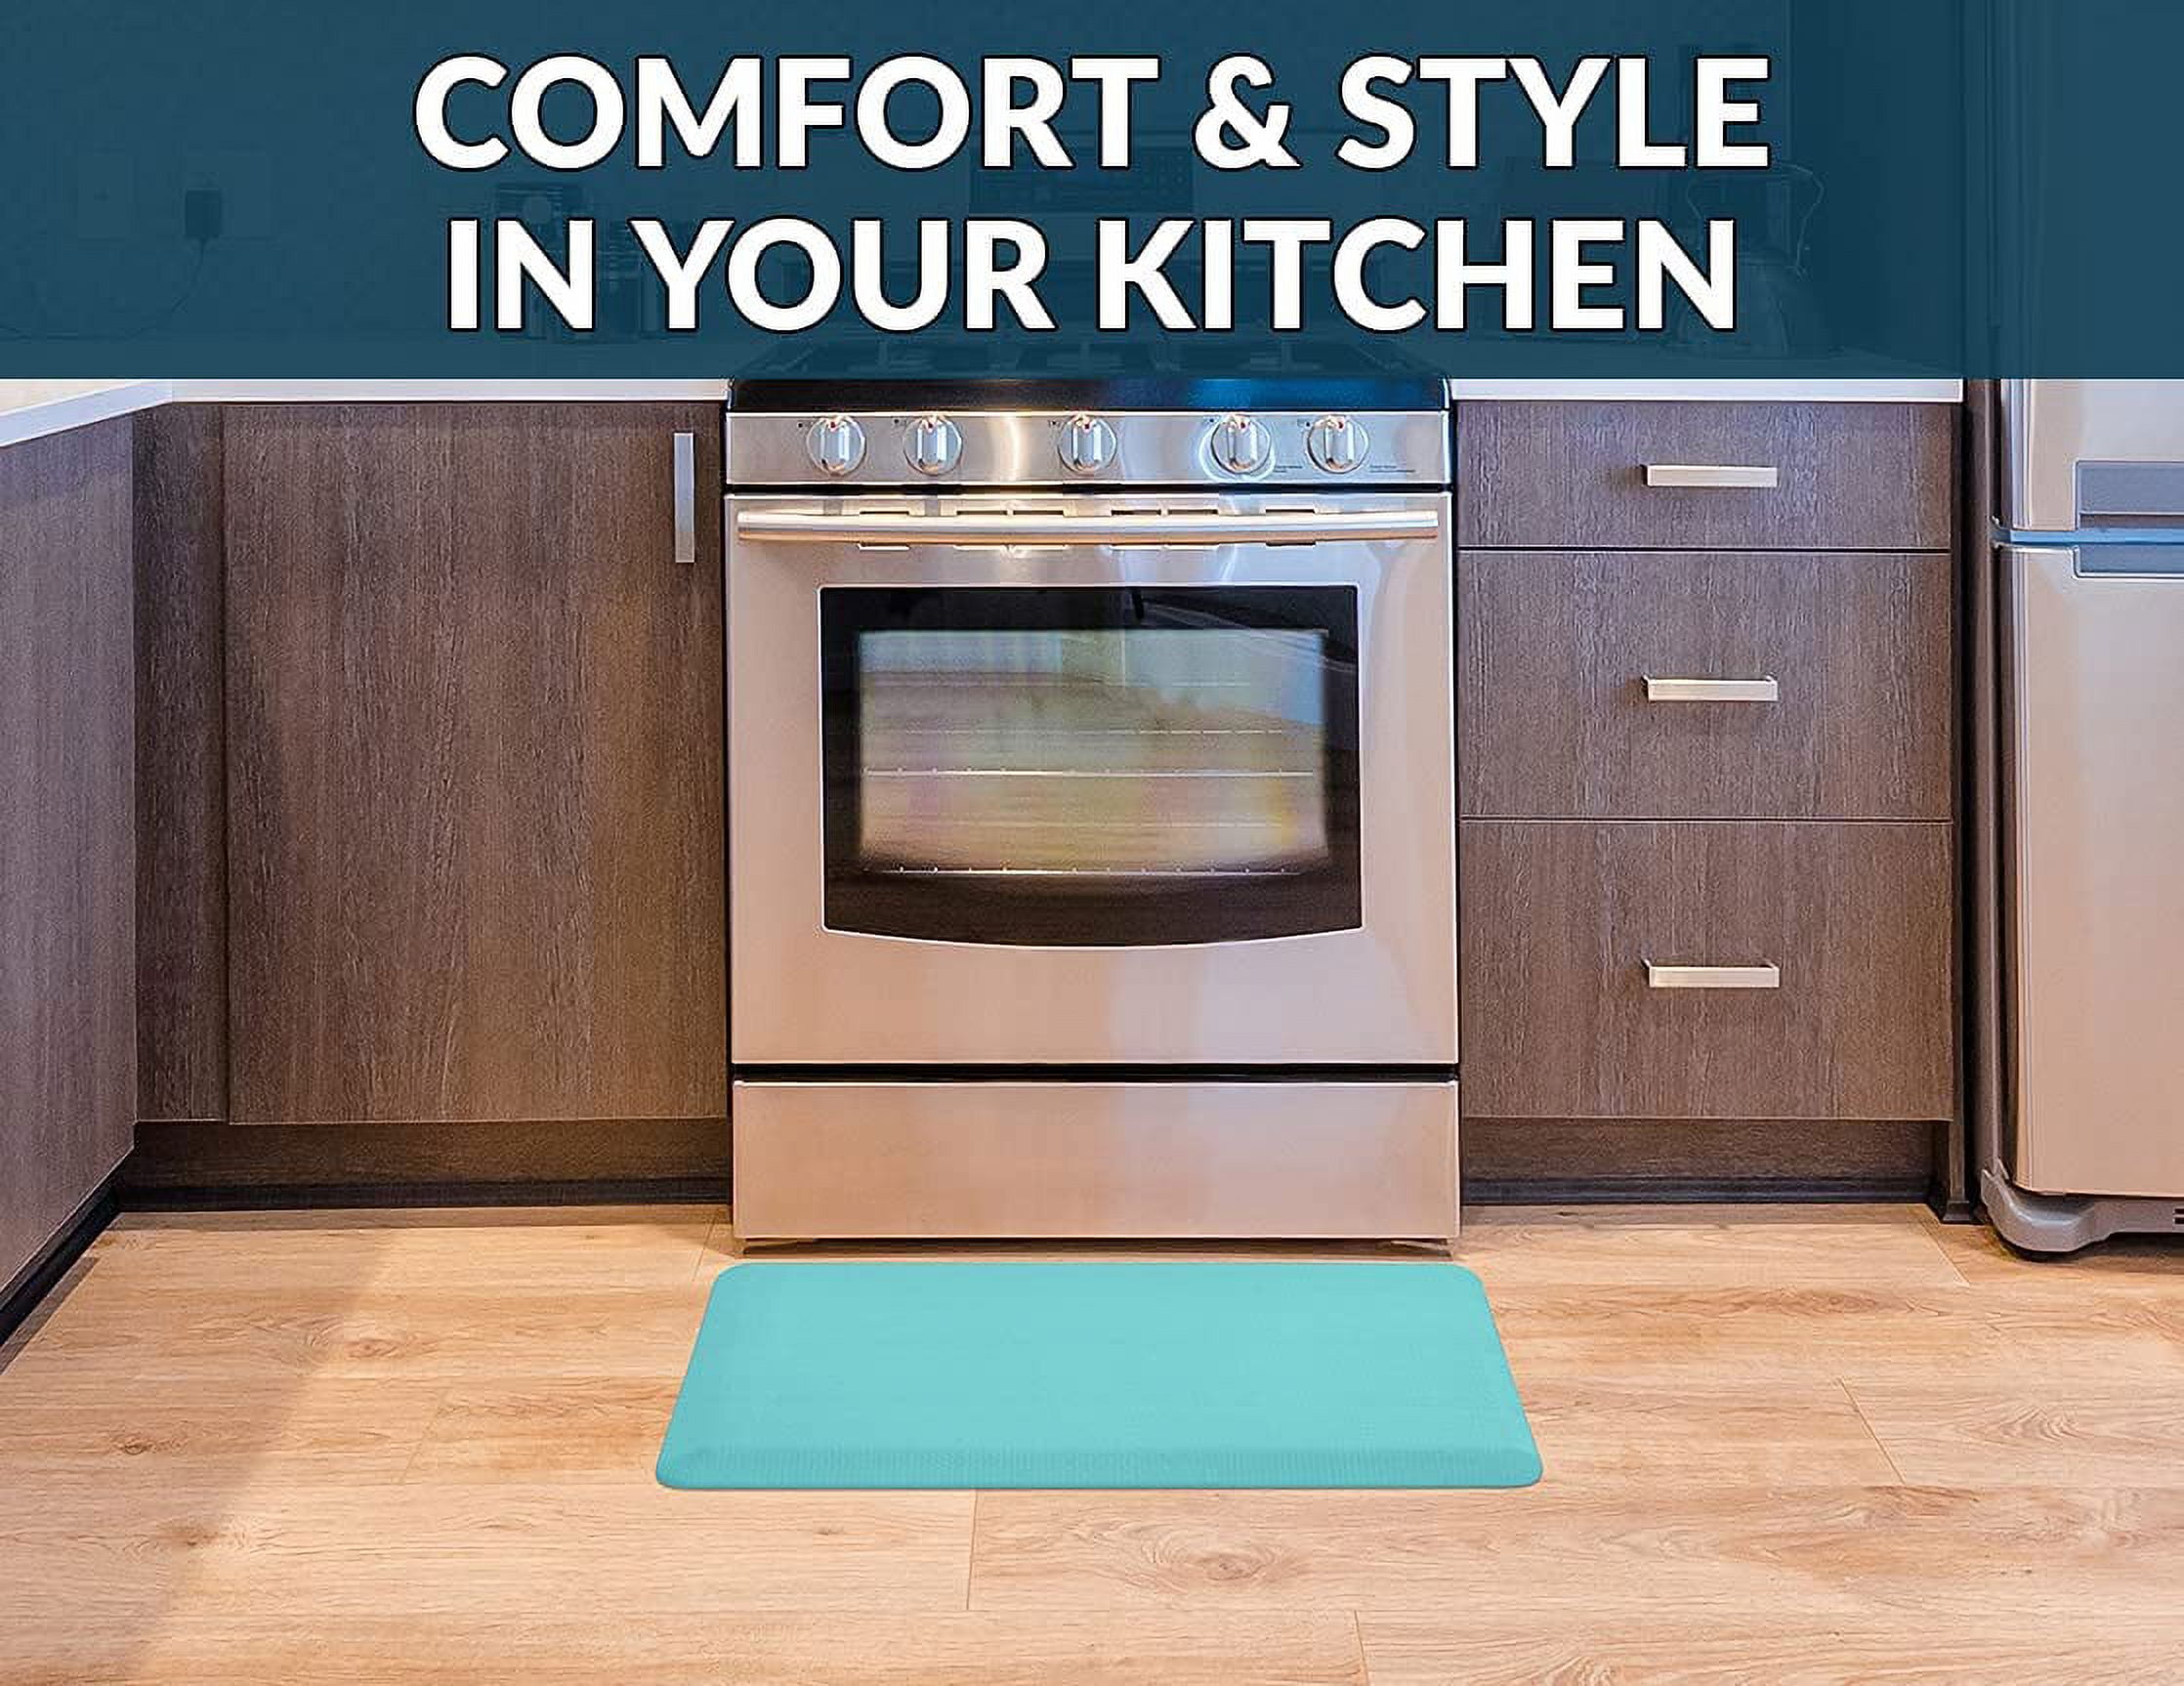 Color&Geometry Anti Fatigue Floor Comfort Mat 3/4 Inch Thick 20 32  Perfect for Standing Desks, Kitchen Sink, Stove, Dishwasher, Countertop,  Office